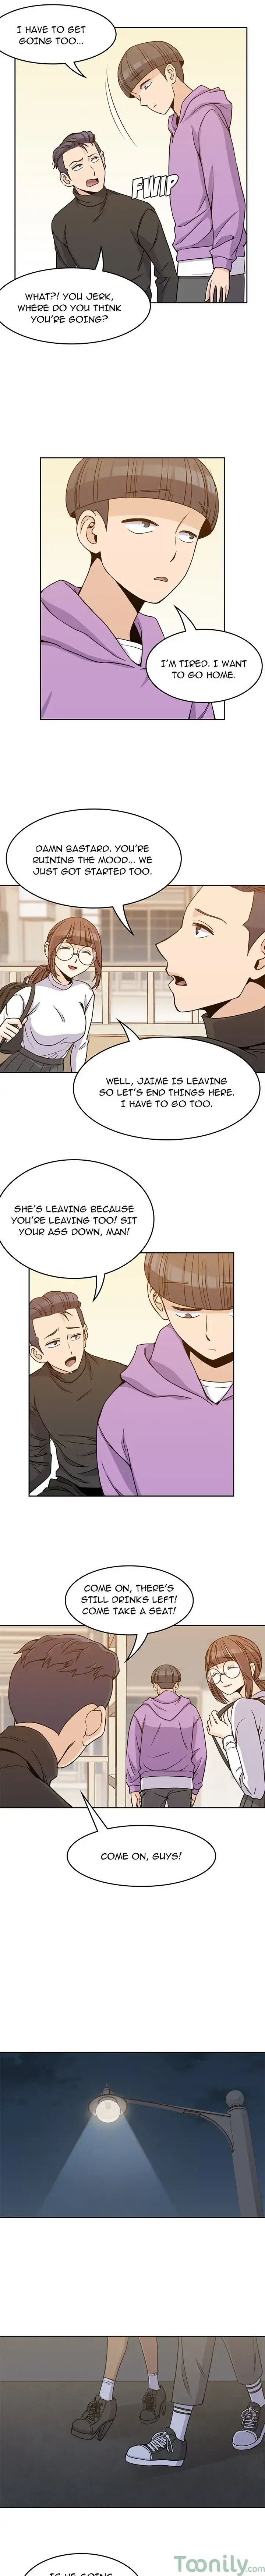 Boys are Boys - Chapter 5 Page 7